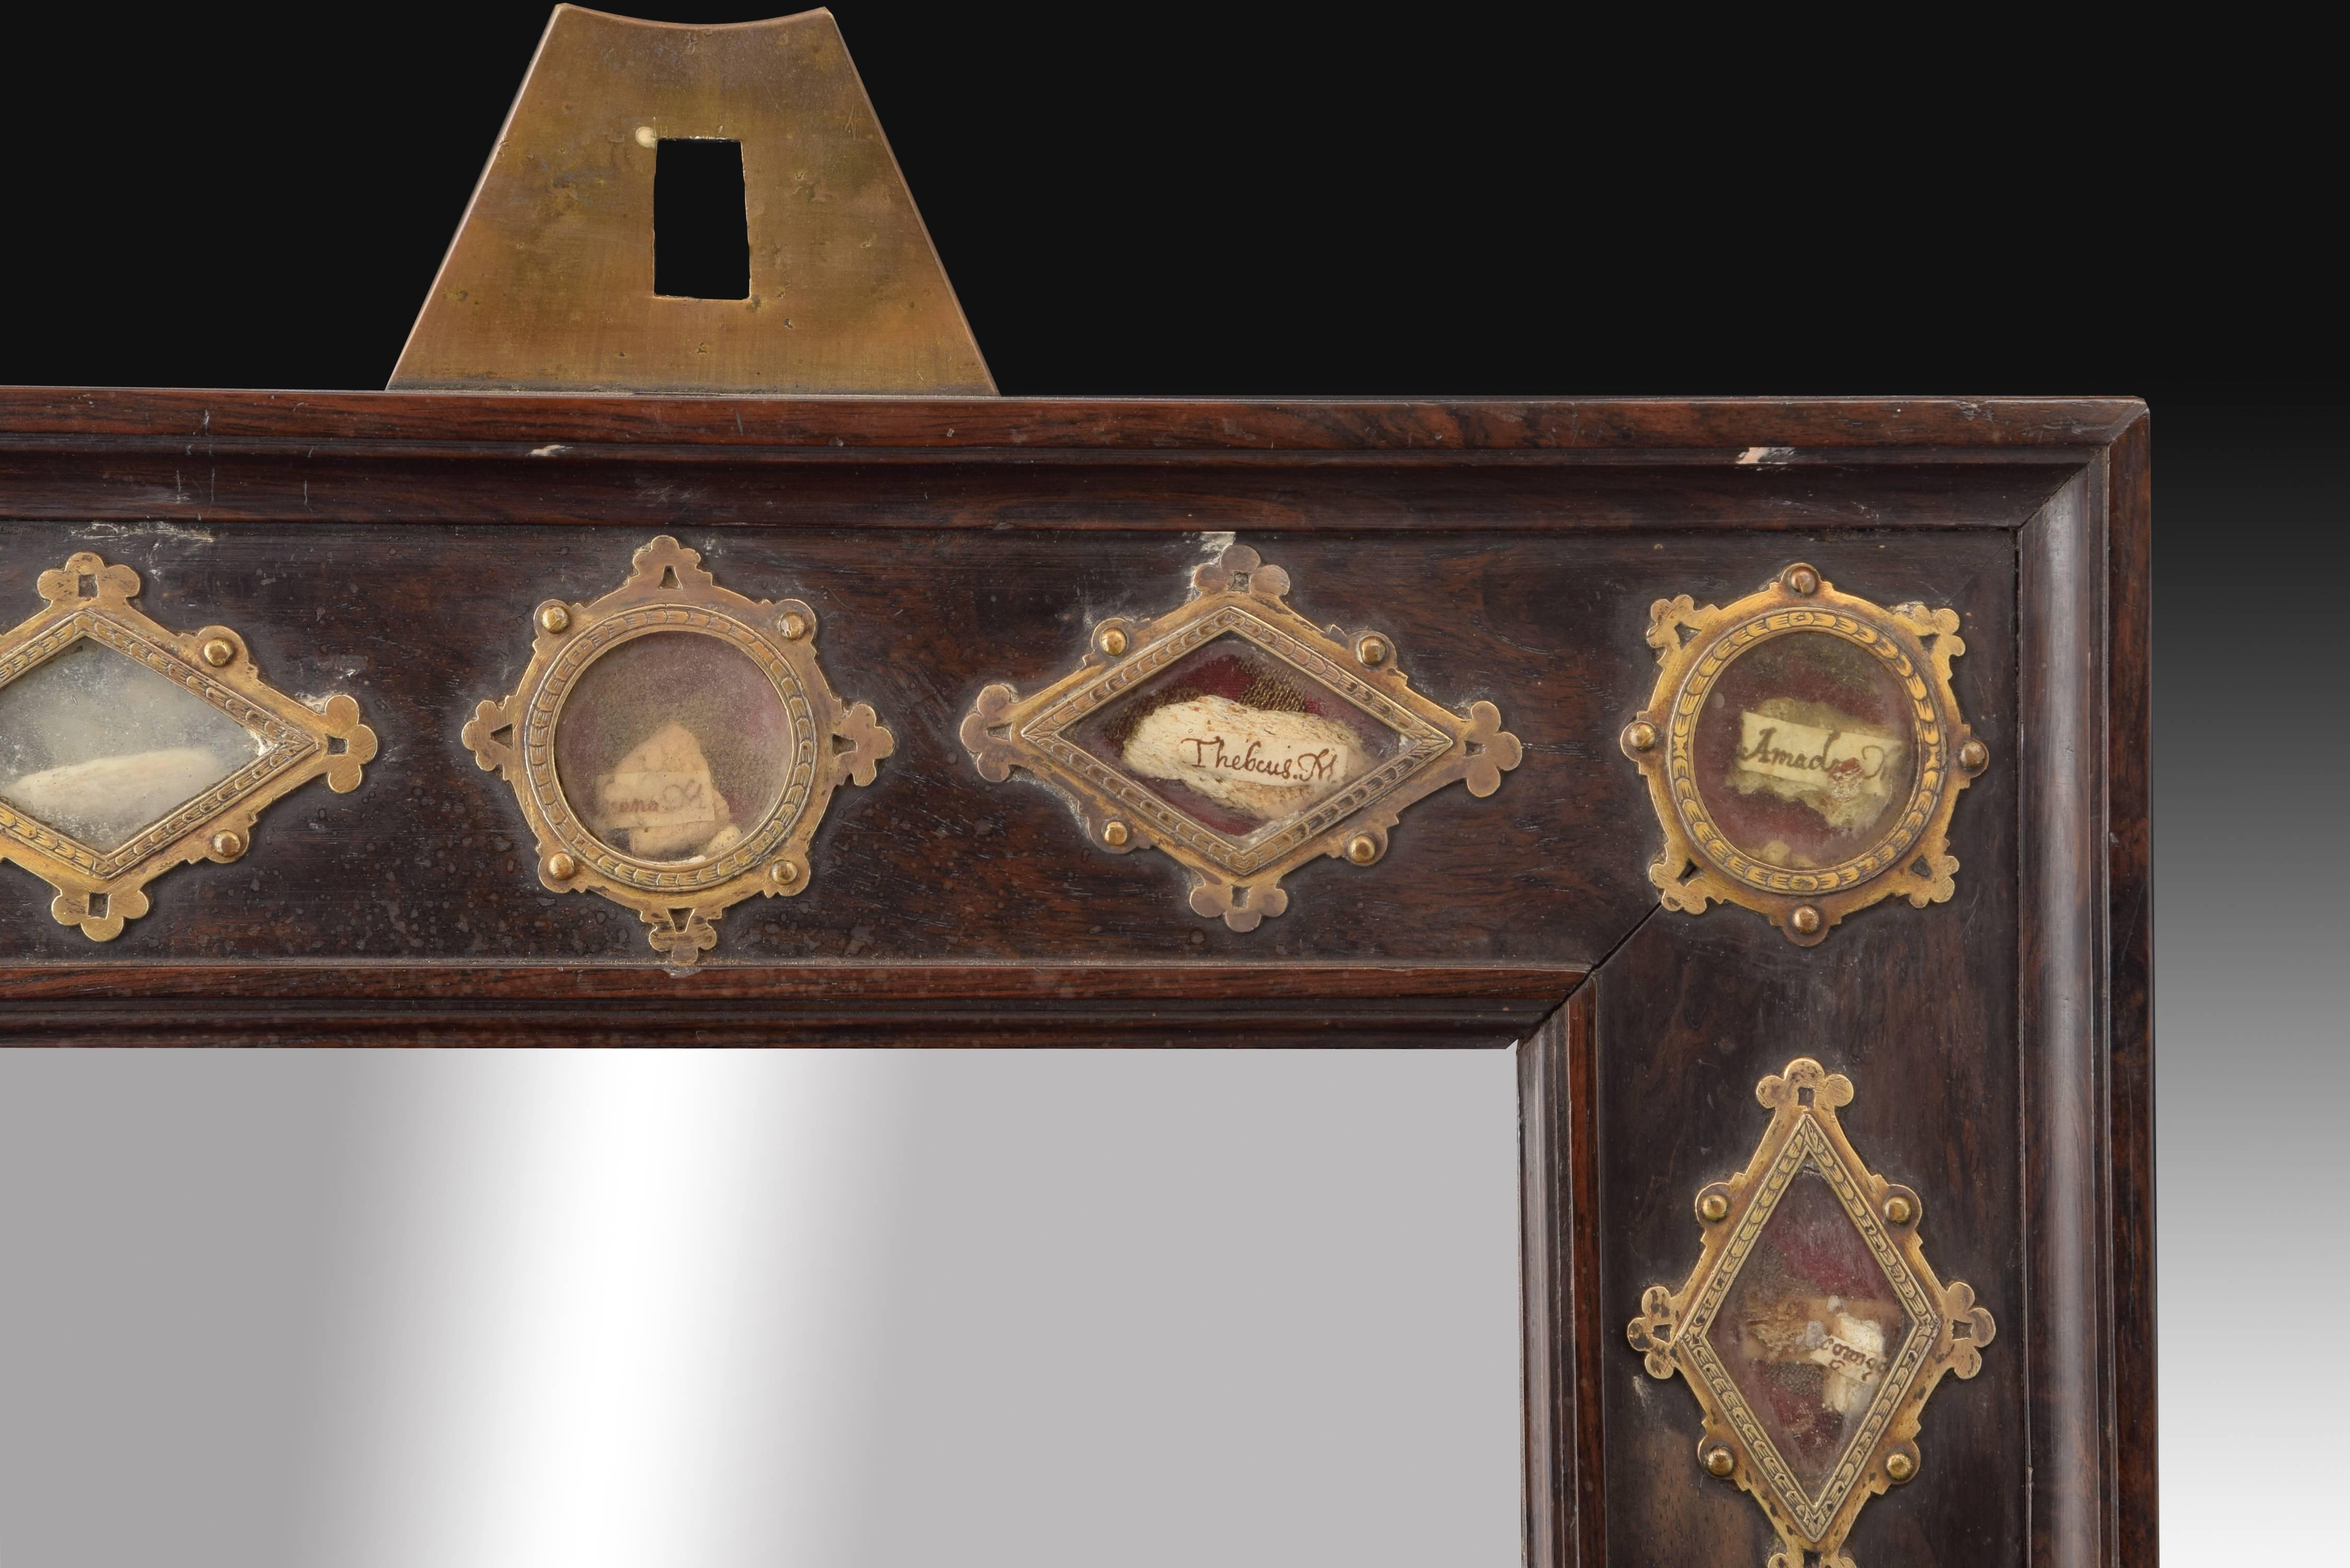 Rectangular frame of carved ebony wood decorated with fine moldings on the edges of it. It has a metal piece on the top to place it on the wall and, in the central part of it, a series of spaces reserved for different relics. These present several